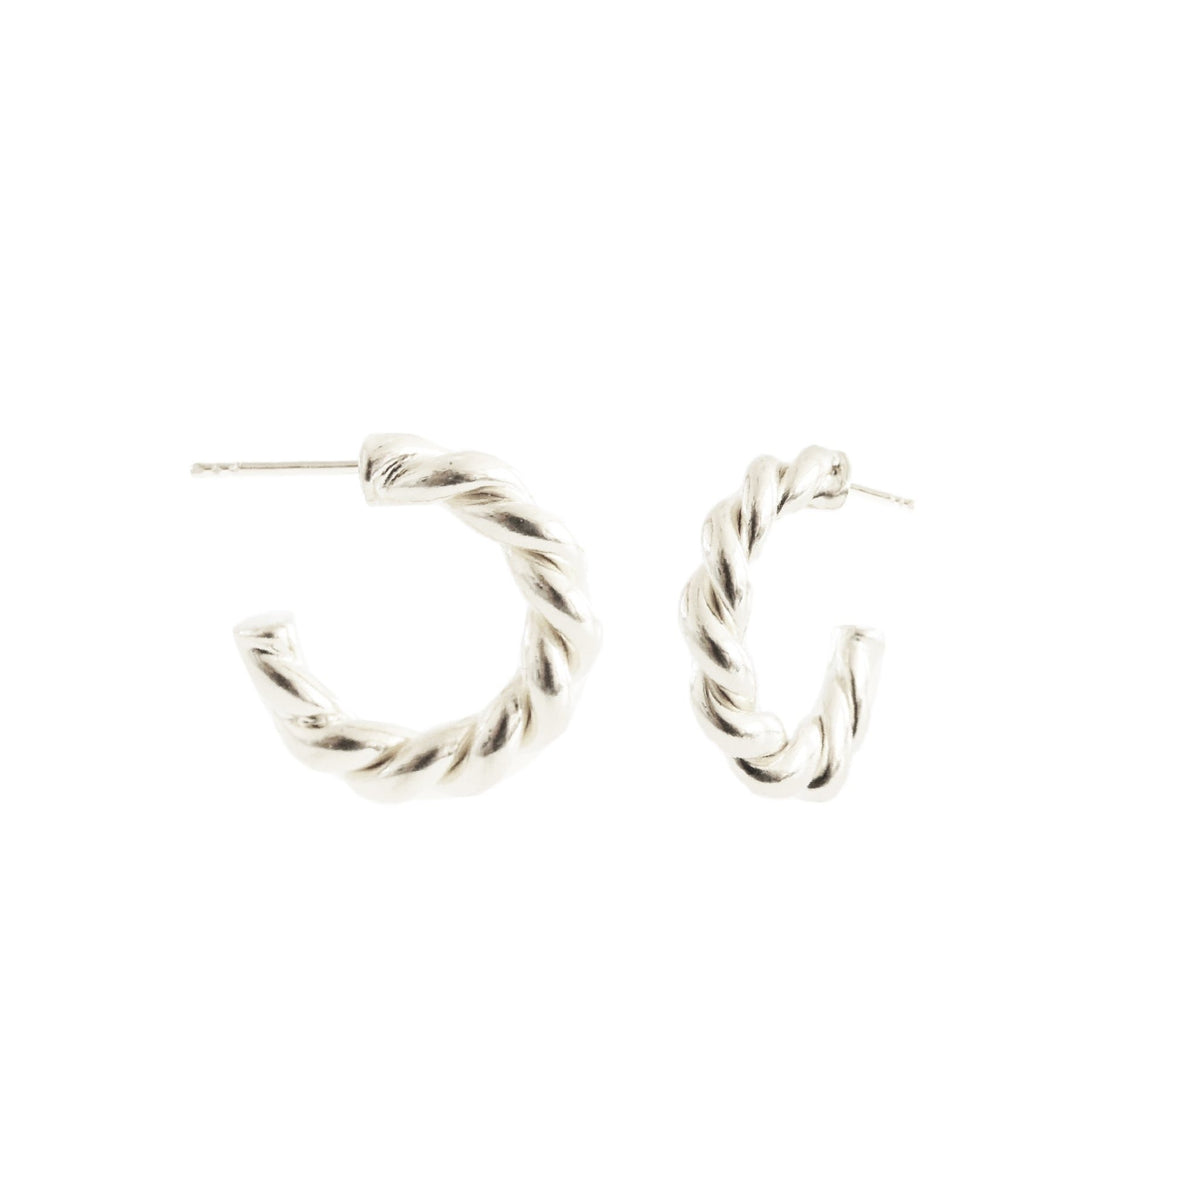 FRAICHE INSPIRE TWISTED CYLINDER HOOPS - SILVER - SO PRETTY CARA COTTER